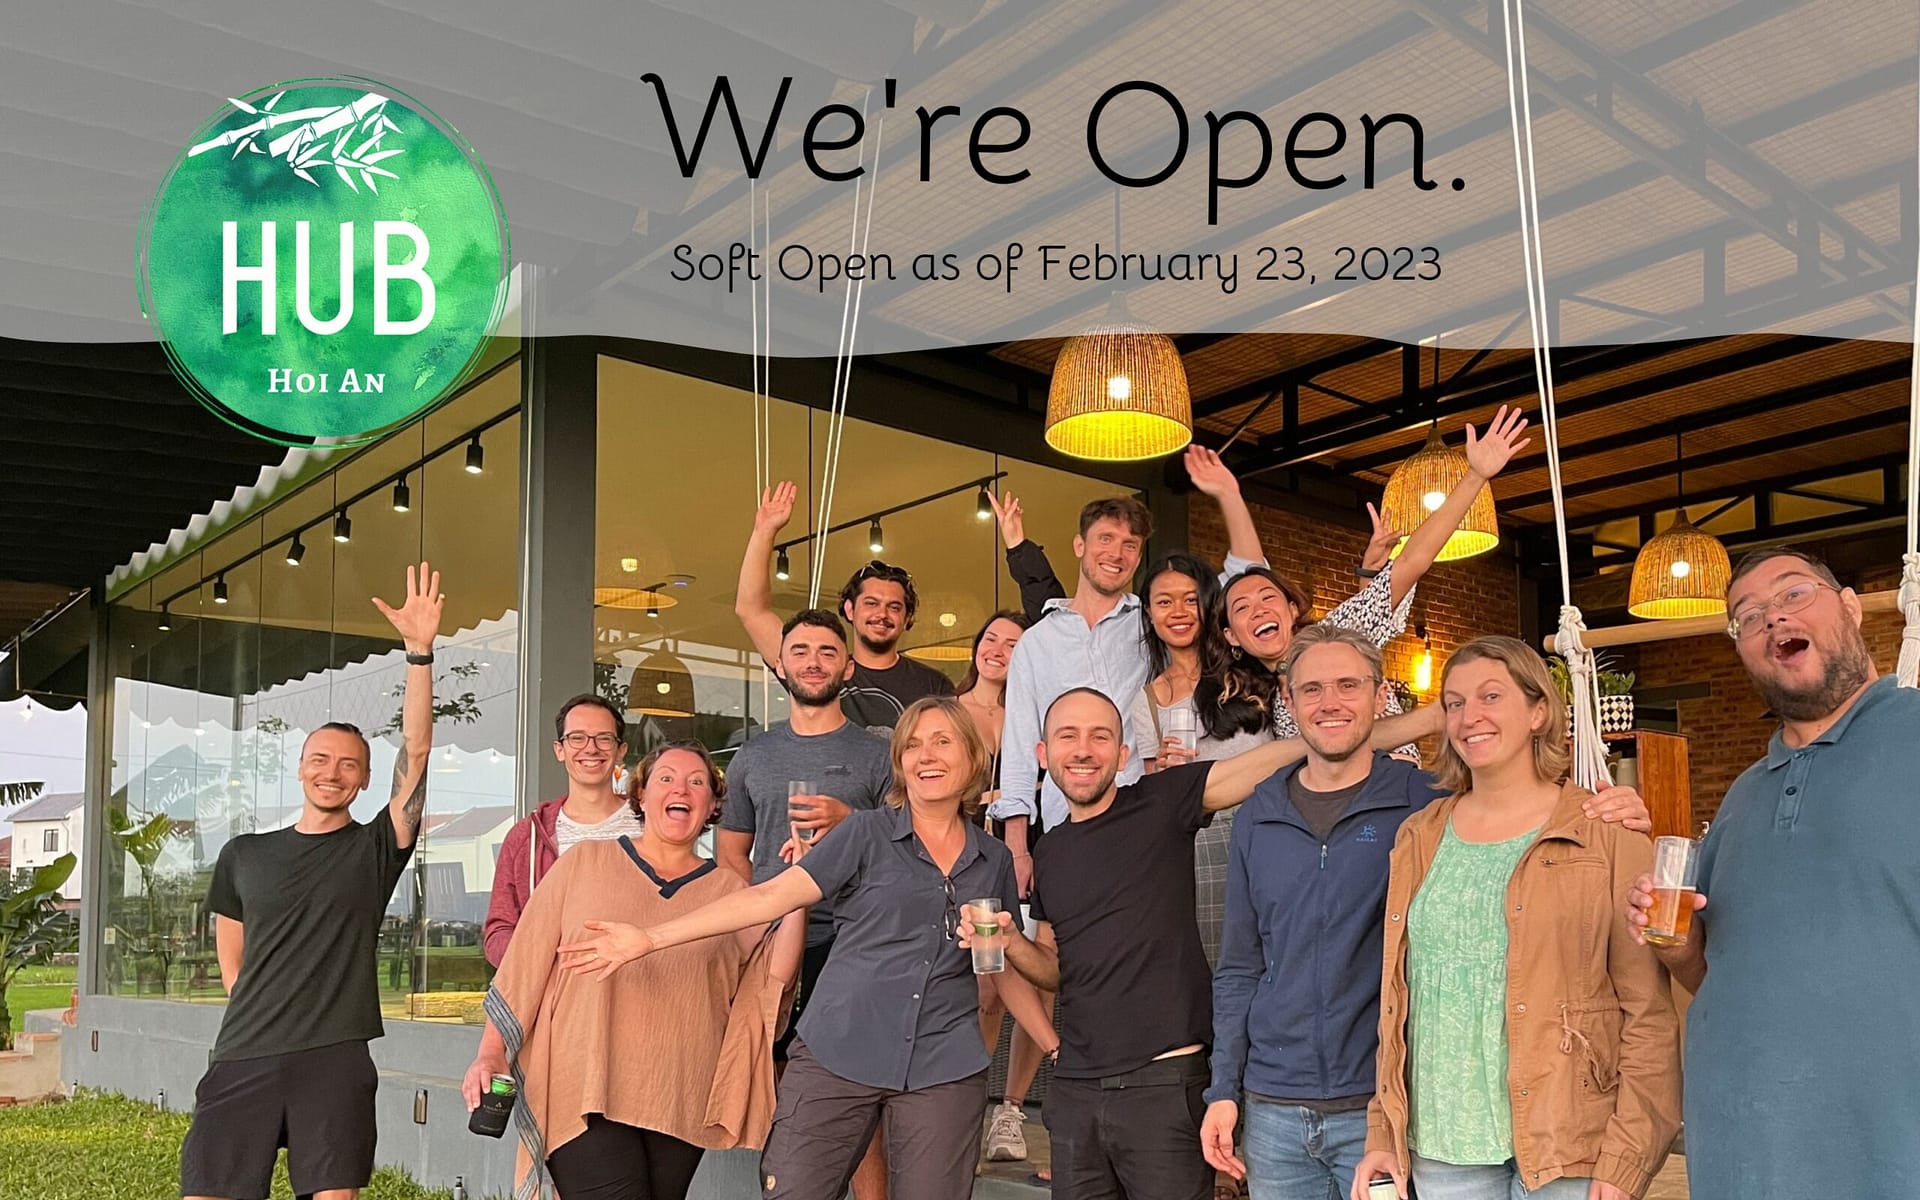 We're Open graphic